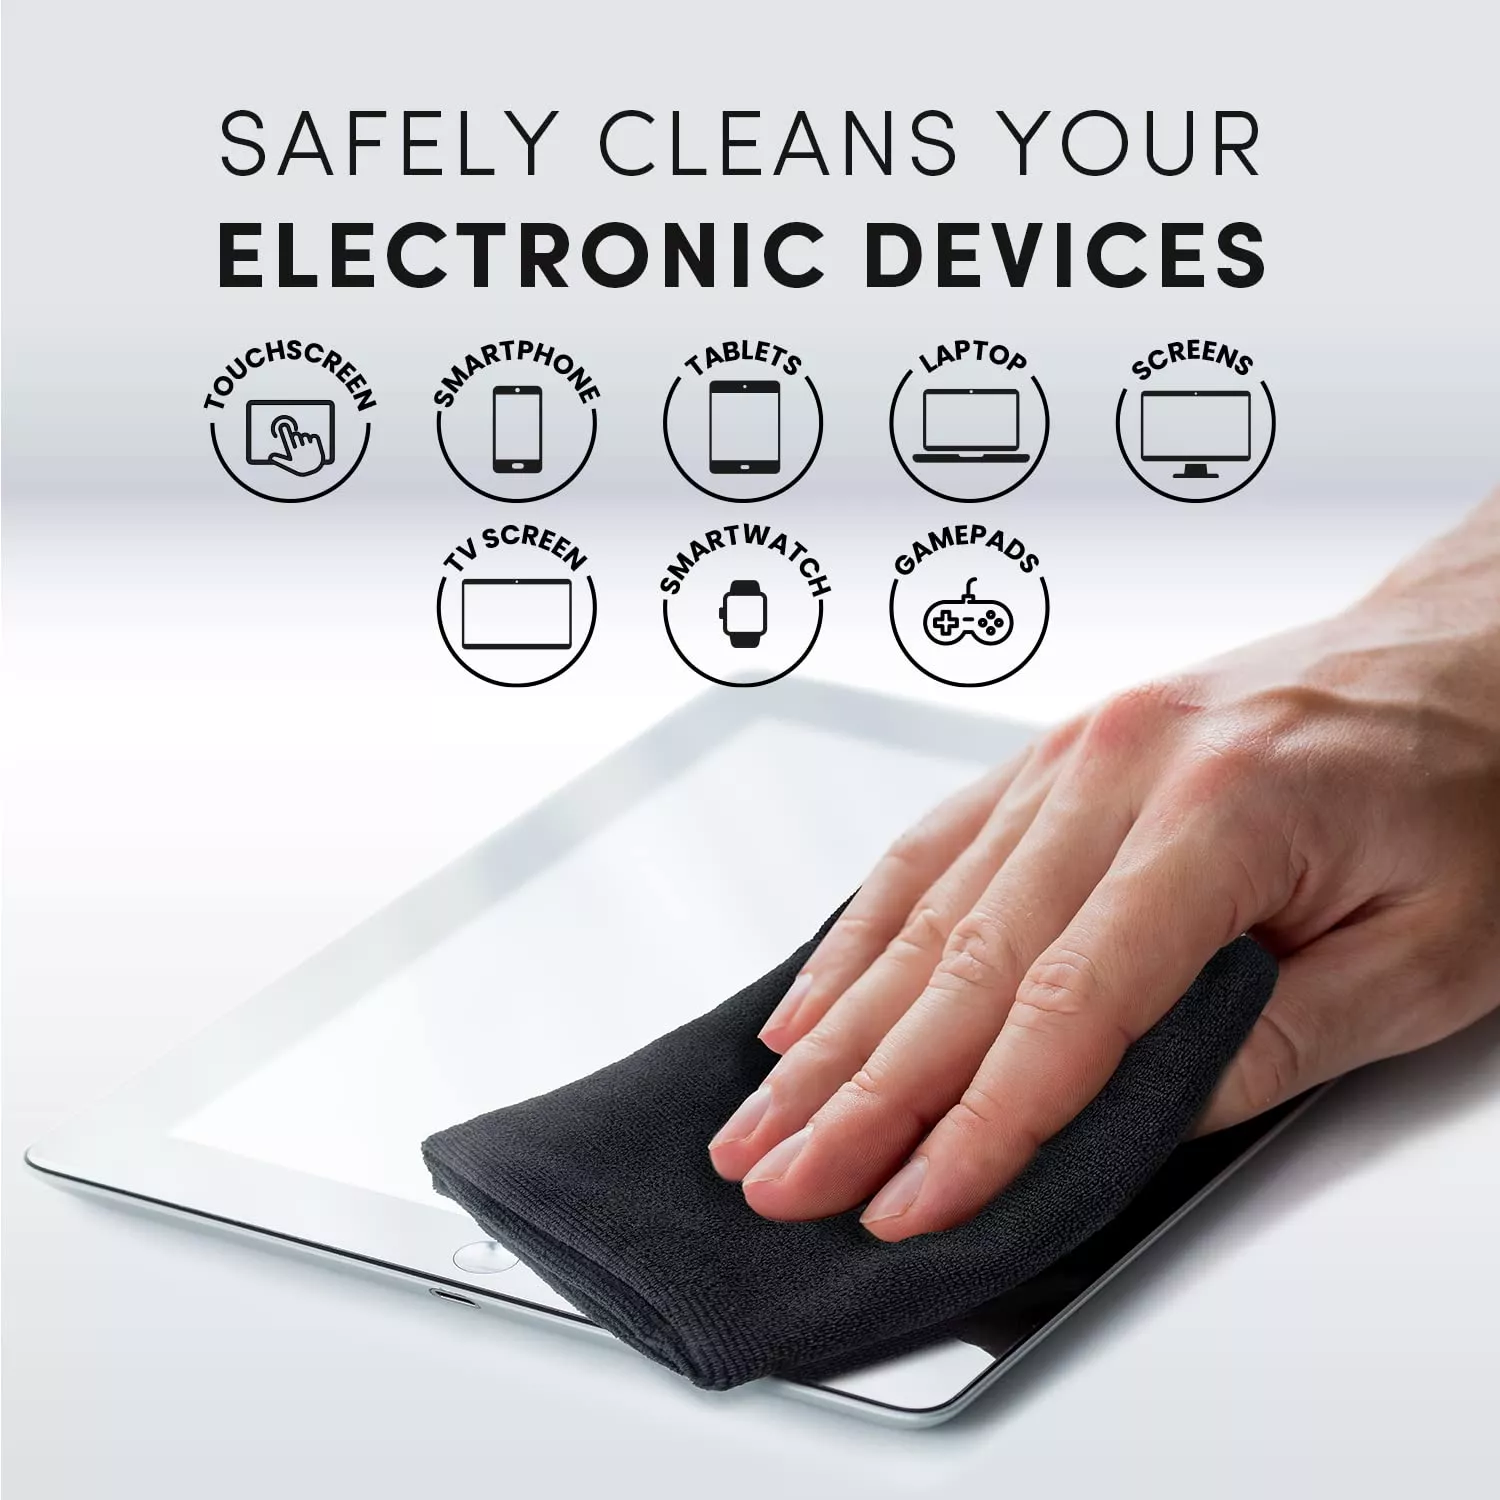 EVEO Premium safely cleans your electronic devices